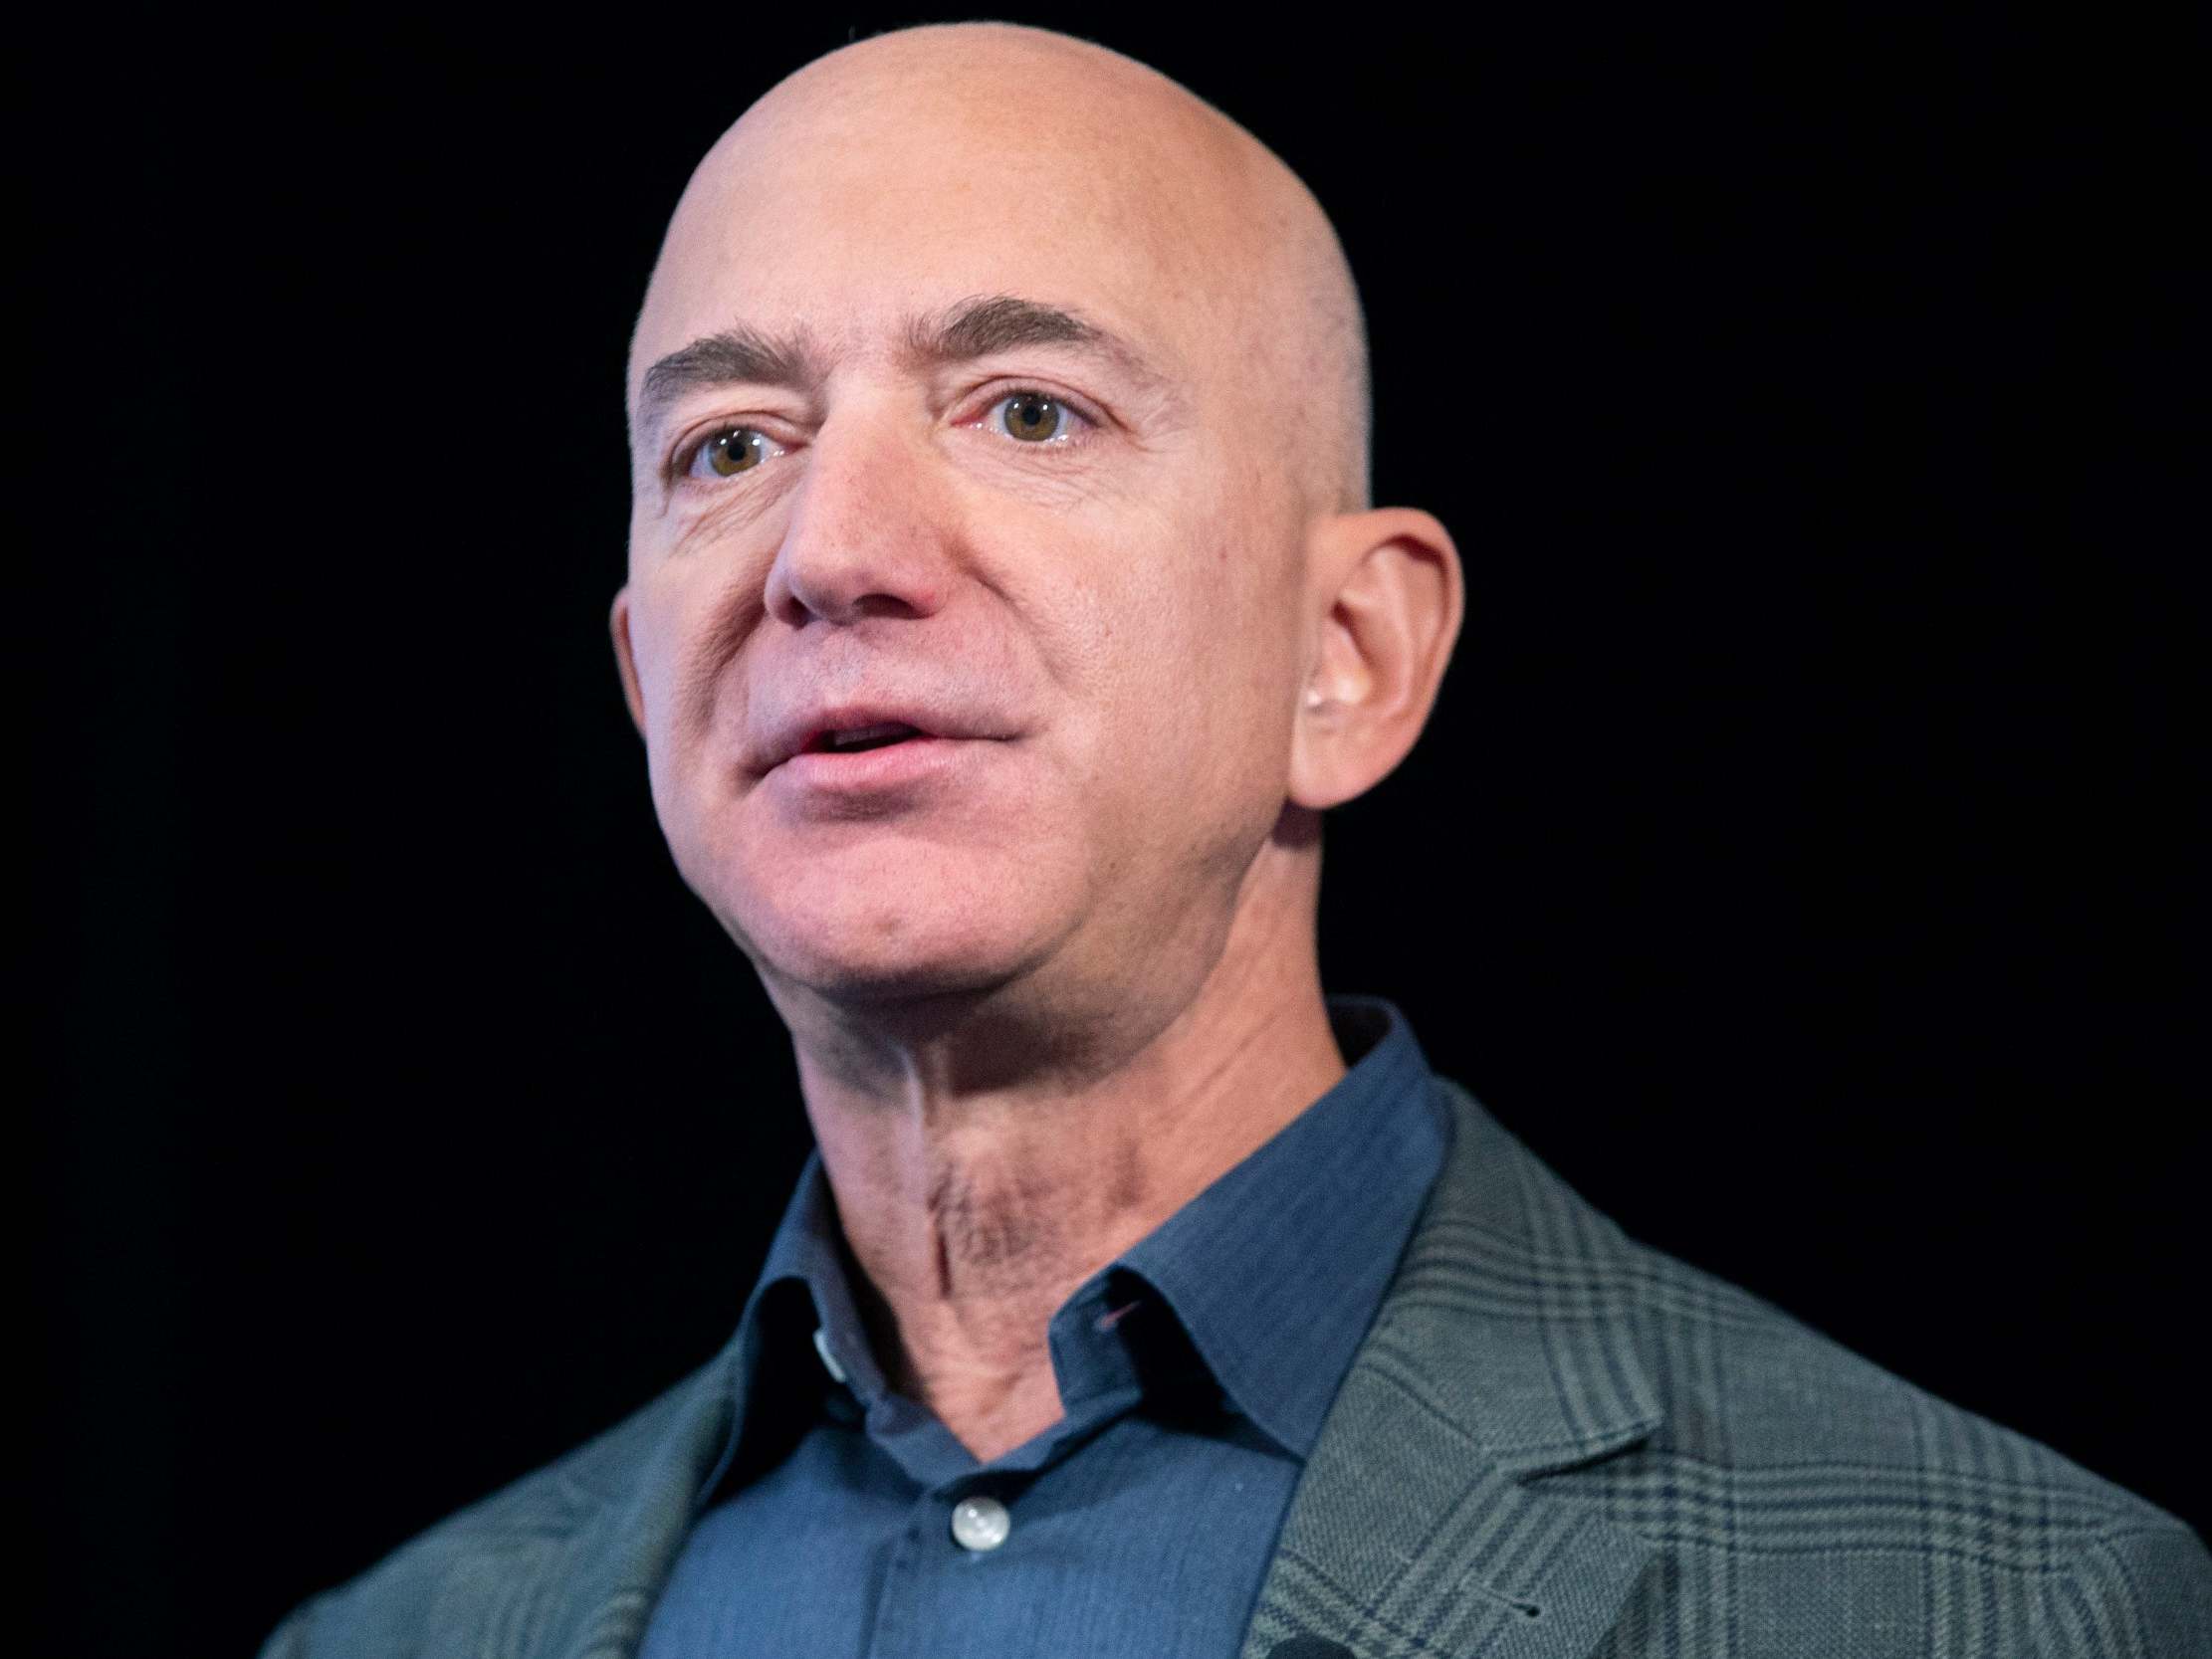 Jeff Bezos blasted for hypocrisy over $10bn climate fund: 'One hand cannot give what the other is taking away'